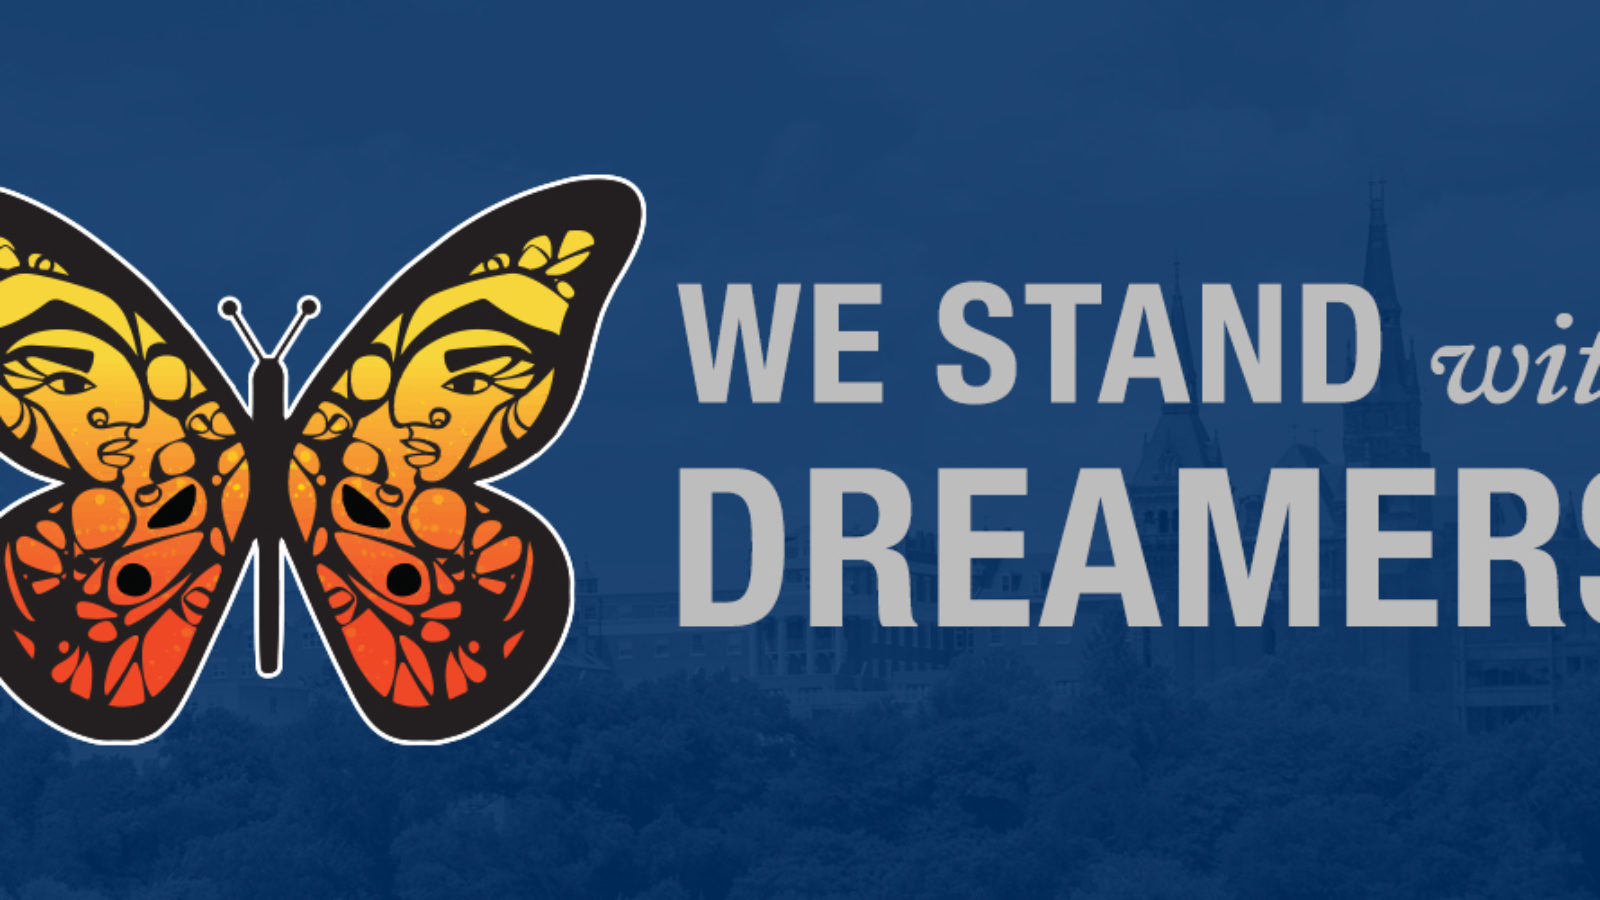 Graphic of a butterfly with Healy Building behind it and the words &quot;We Stand With Dreamers.&quot;